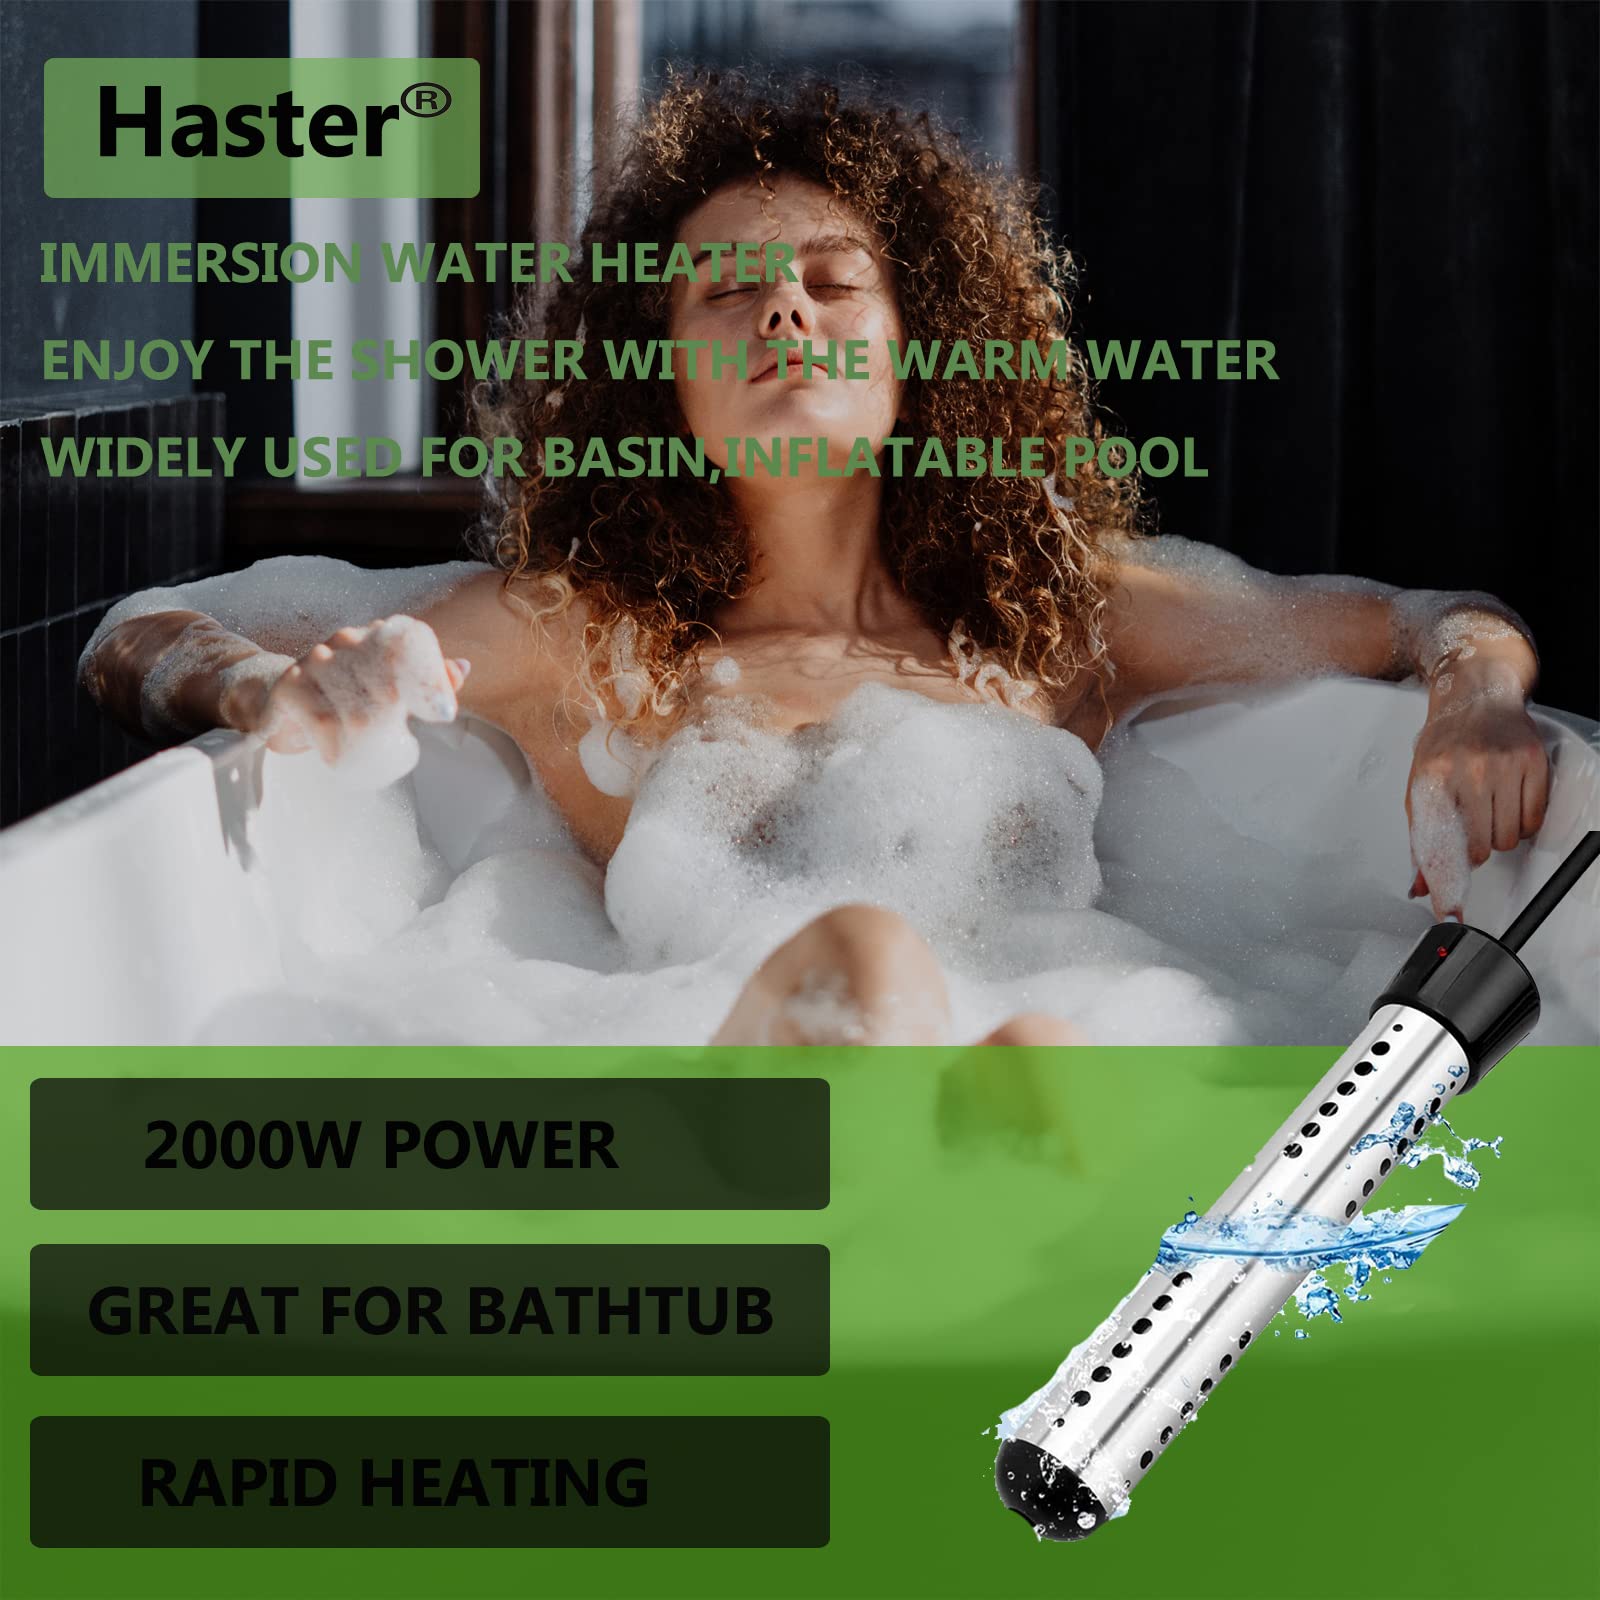 HASTER 2000W Immersion Water Heater for Inflatable Pool Bathtub,Bucket Heater with 304 SS Guard,Electric Submersible Water Heater with LCD Thermometer,Heat 5 Gallon Water in Minutes (Black)